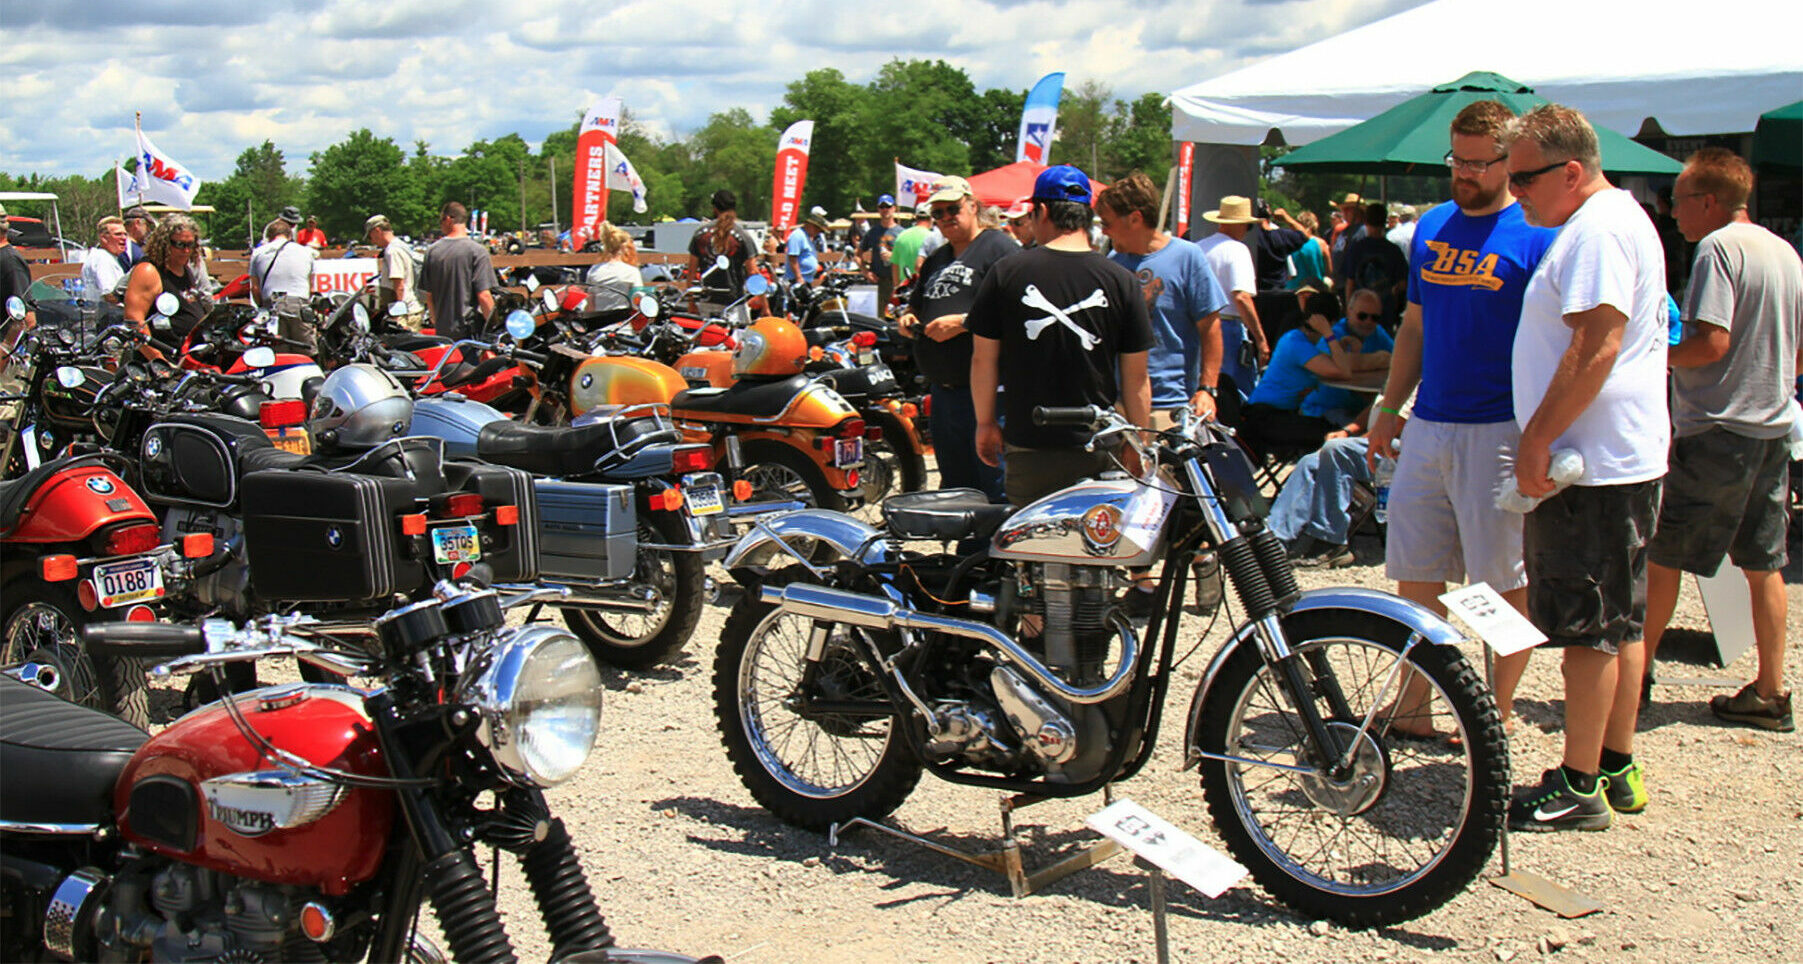 A scene from the Motorcycle Show at AMA Vintage Motorcycle Days 2022 at Mid-Ohio. Photo courtesy AMA.